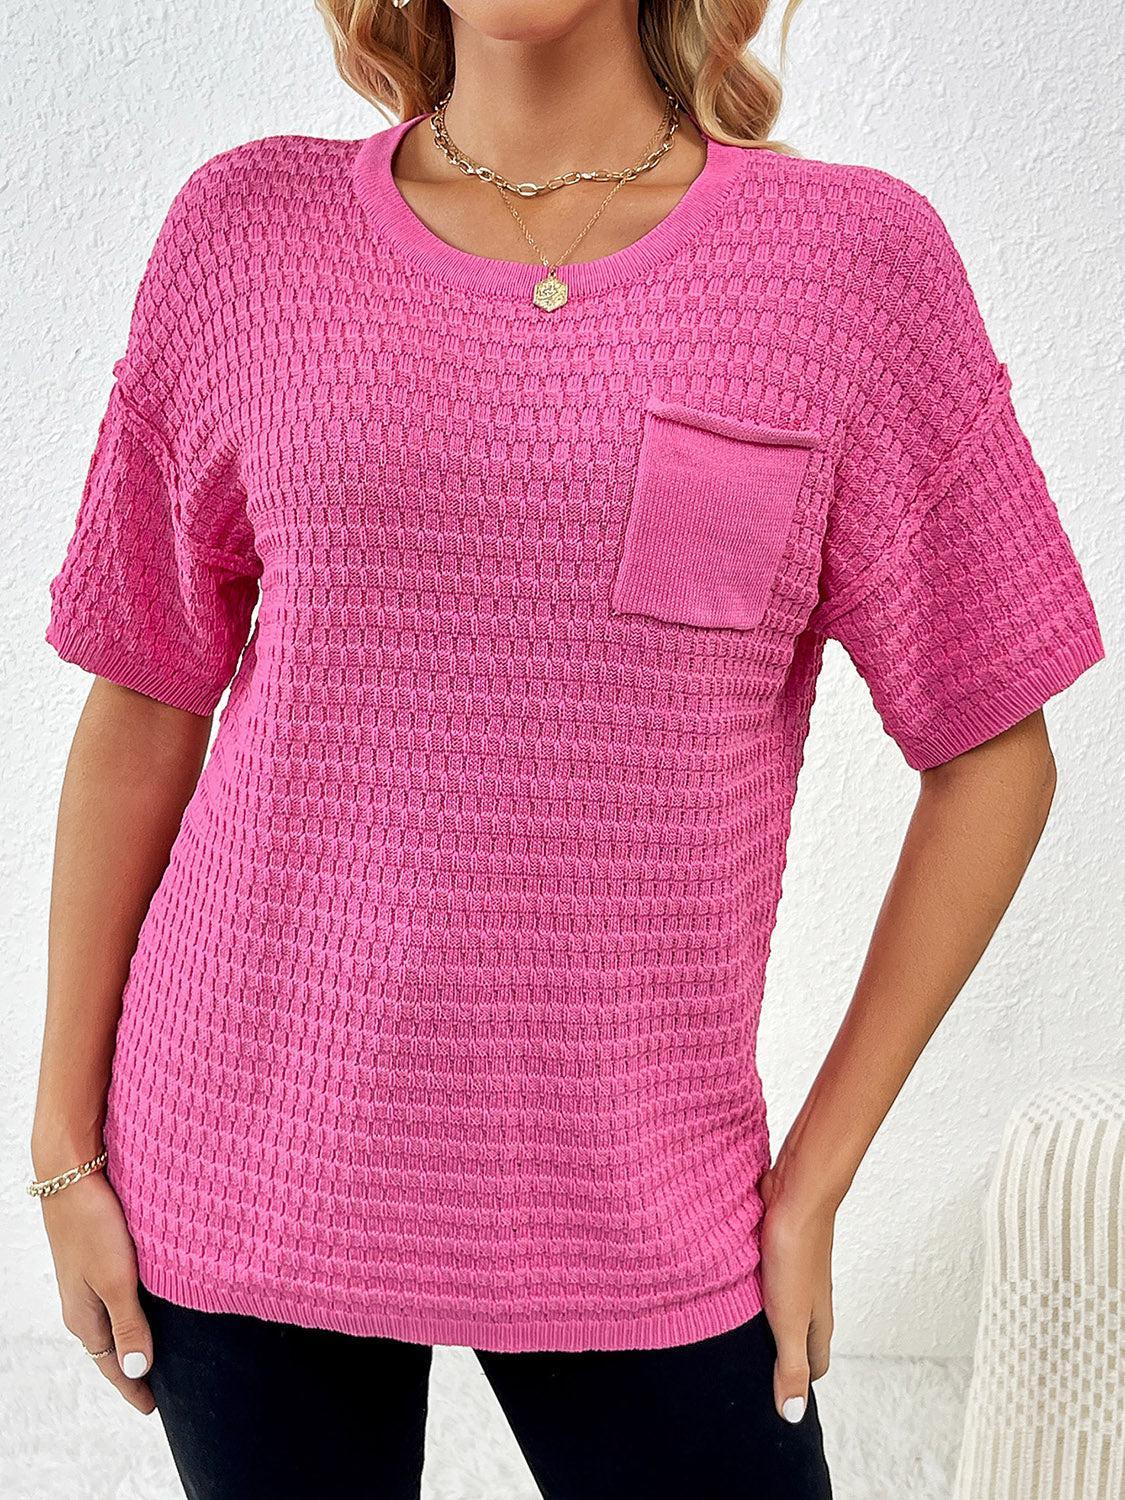 a woman wearing a pink top with a pocket